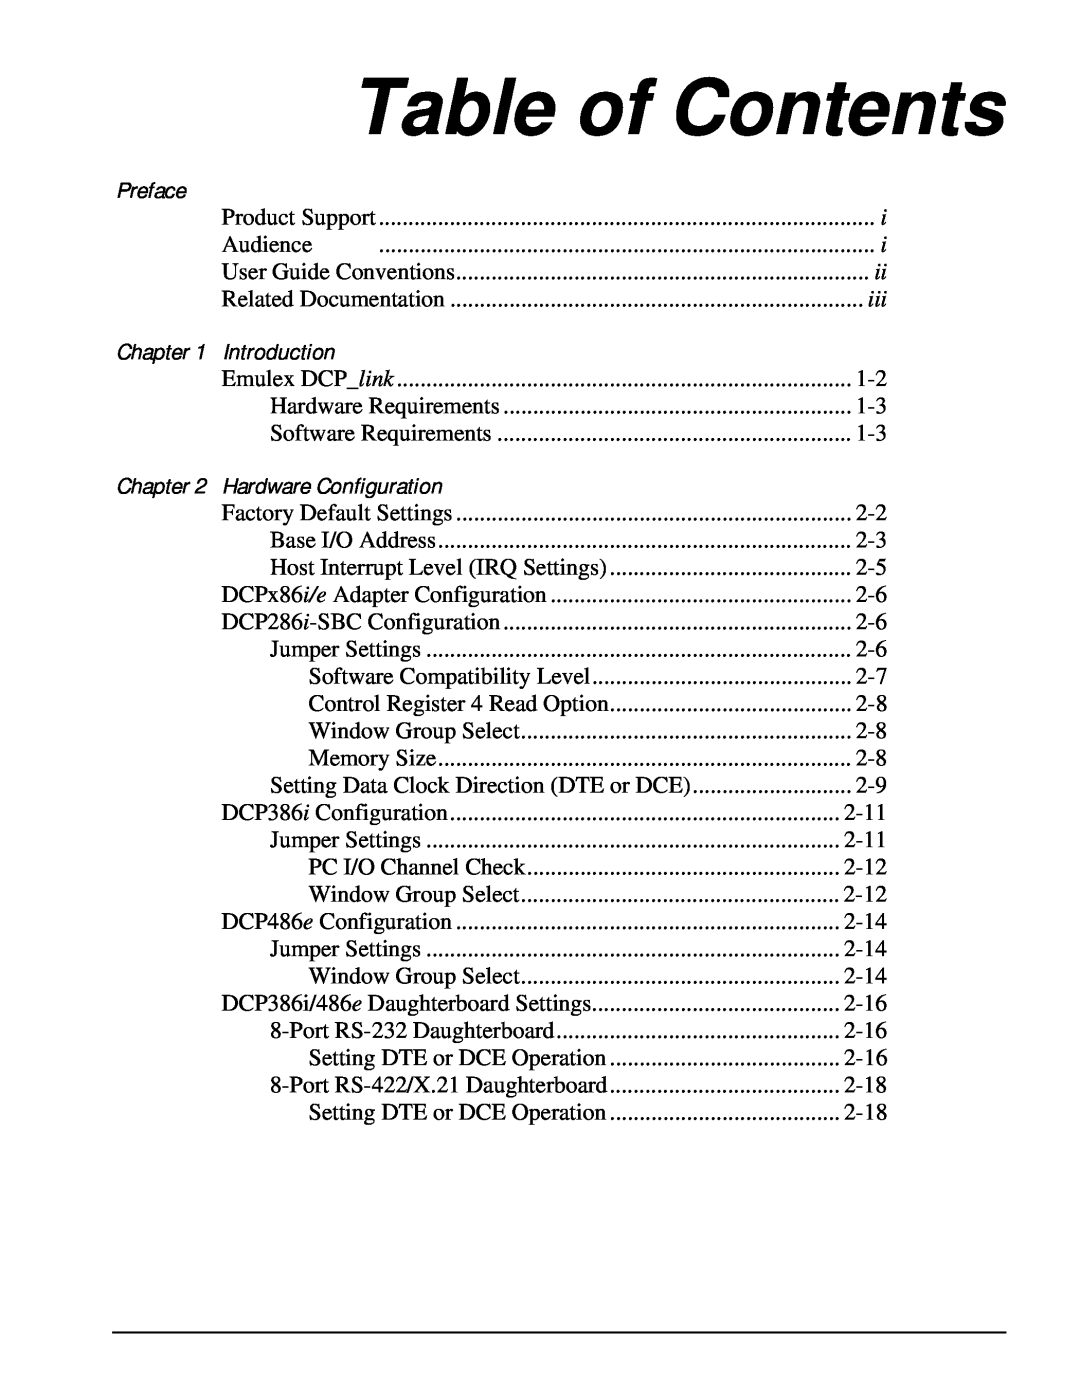 Emulex DCP_link manual Table of Contents, Preface, Introduction, Hardware Configuration 